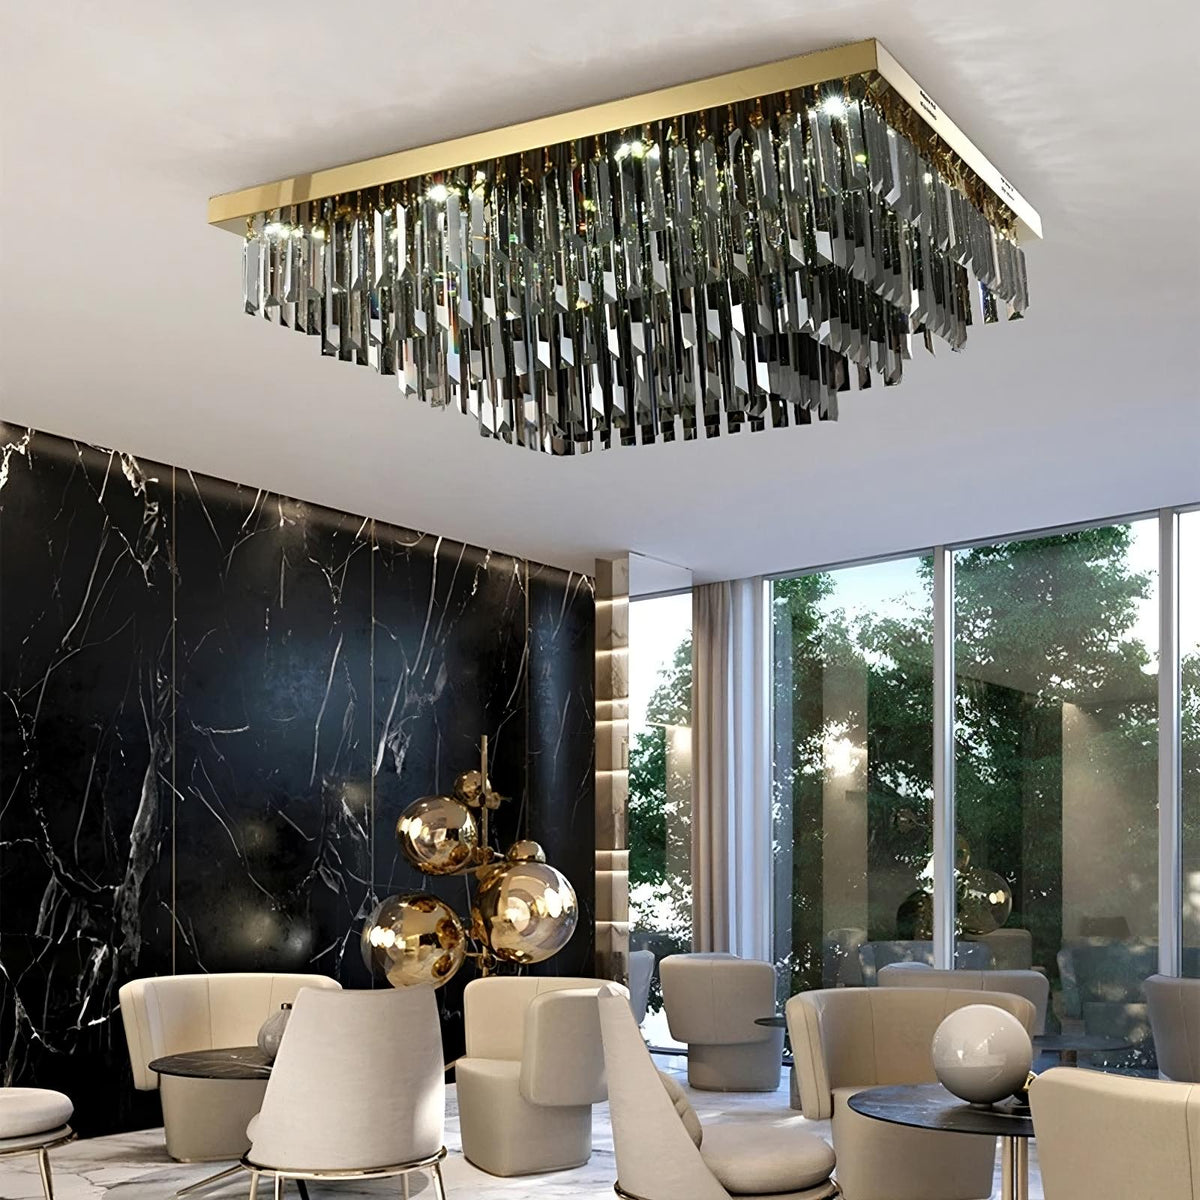 An elegant modern room with a large rectangular Gio Smoke Grey Crystal Ceiling Chandelier from Morsale.com hanging from the ceiling. The chandelier, made of multiple reflective metal strips, enhances the versatile lighting. The room features white chairs, a marble wall, and large windows with greenery visible outside.